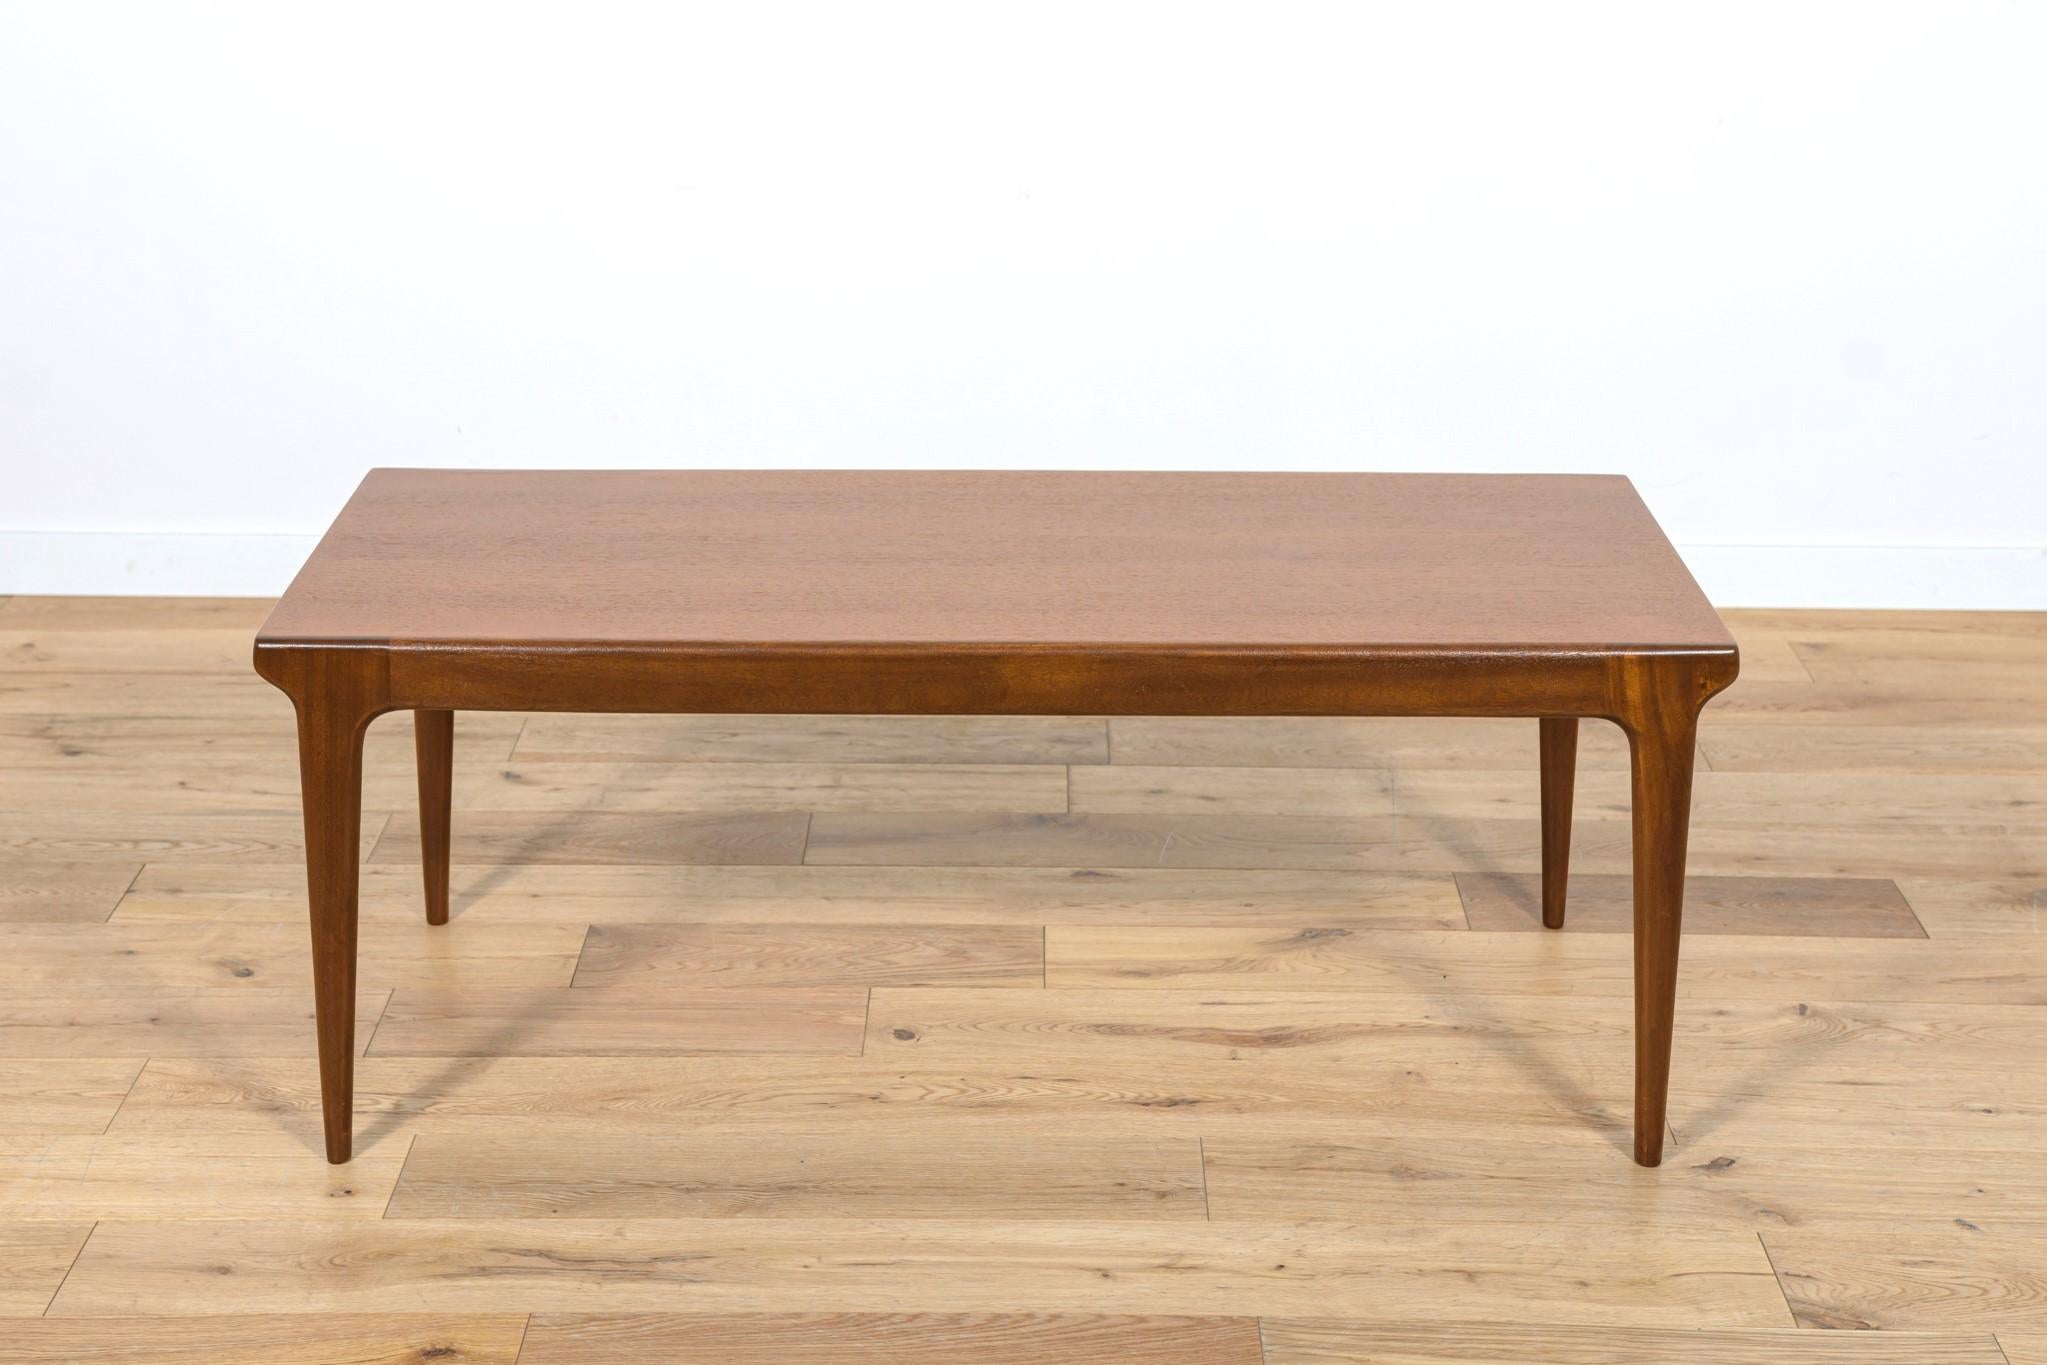 This teak coffee table was manufactured by Younger Ltd. in the 1960s in Great Britain. A teak table with a light, sublime form and high carpentry craftsmanship. The table has been completely renovate. The teak elements have been cleaned and painted